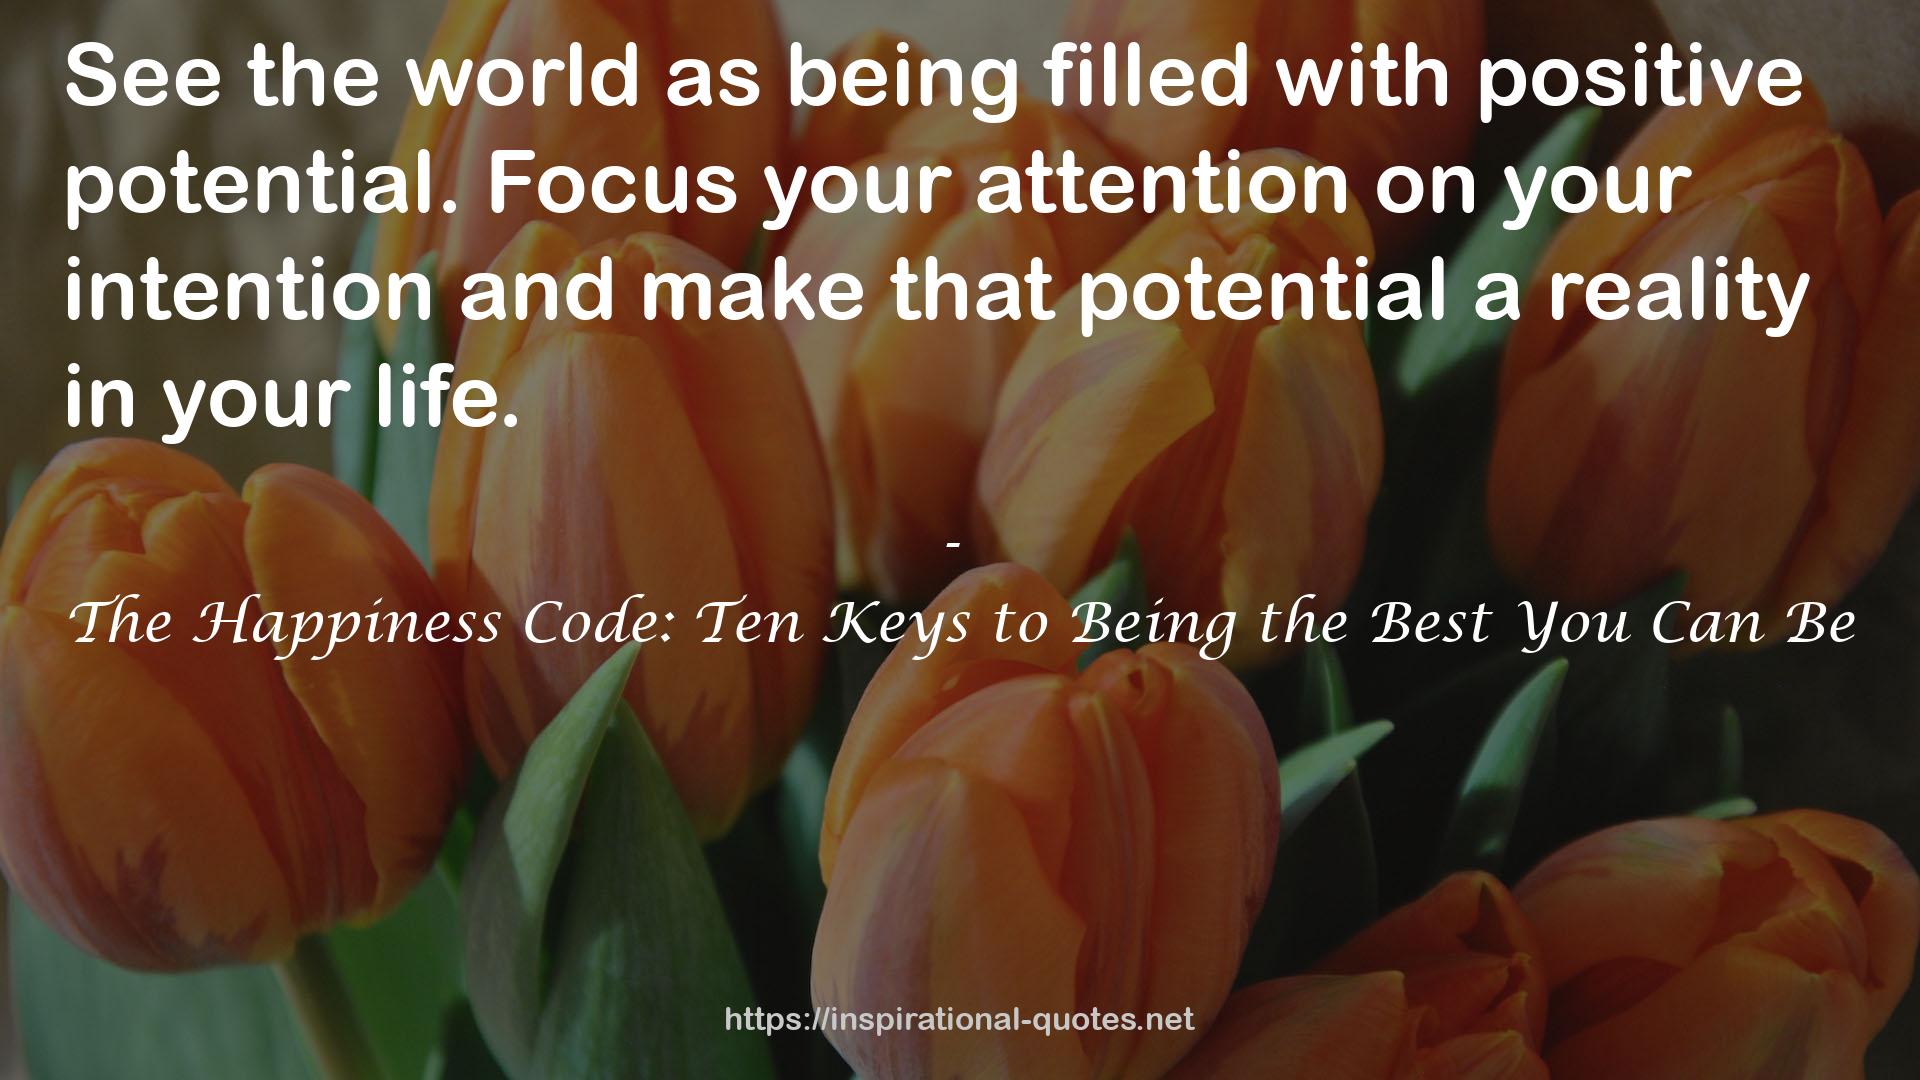 The Happiness Code: Ten Keys to Being the Best You Can Be QUOTES